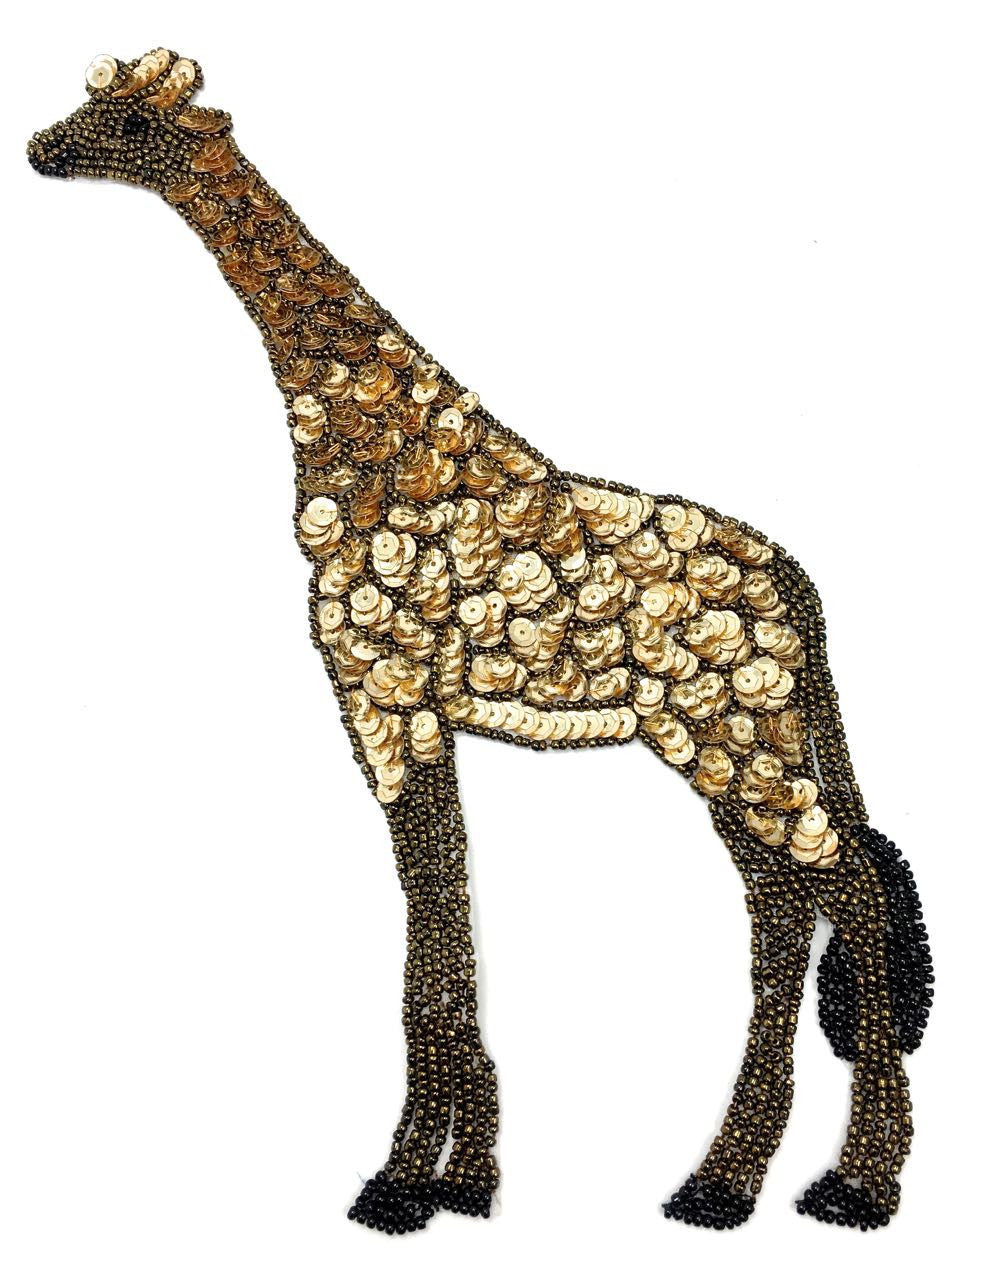 Giraffe with Bronze and Gold Sequins and Beads 11